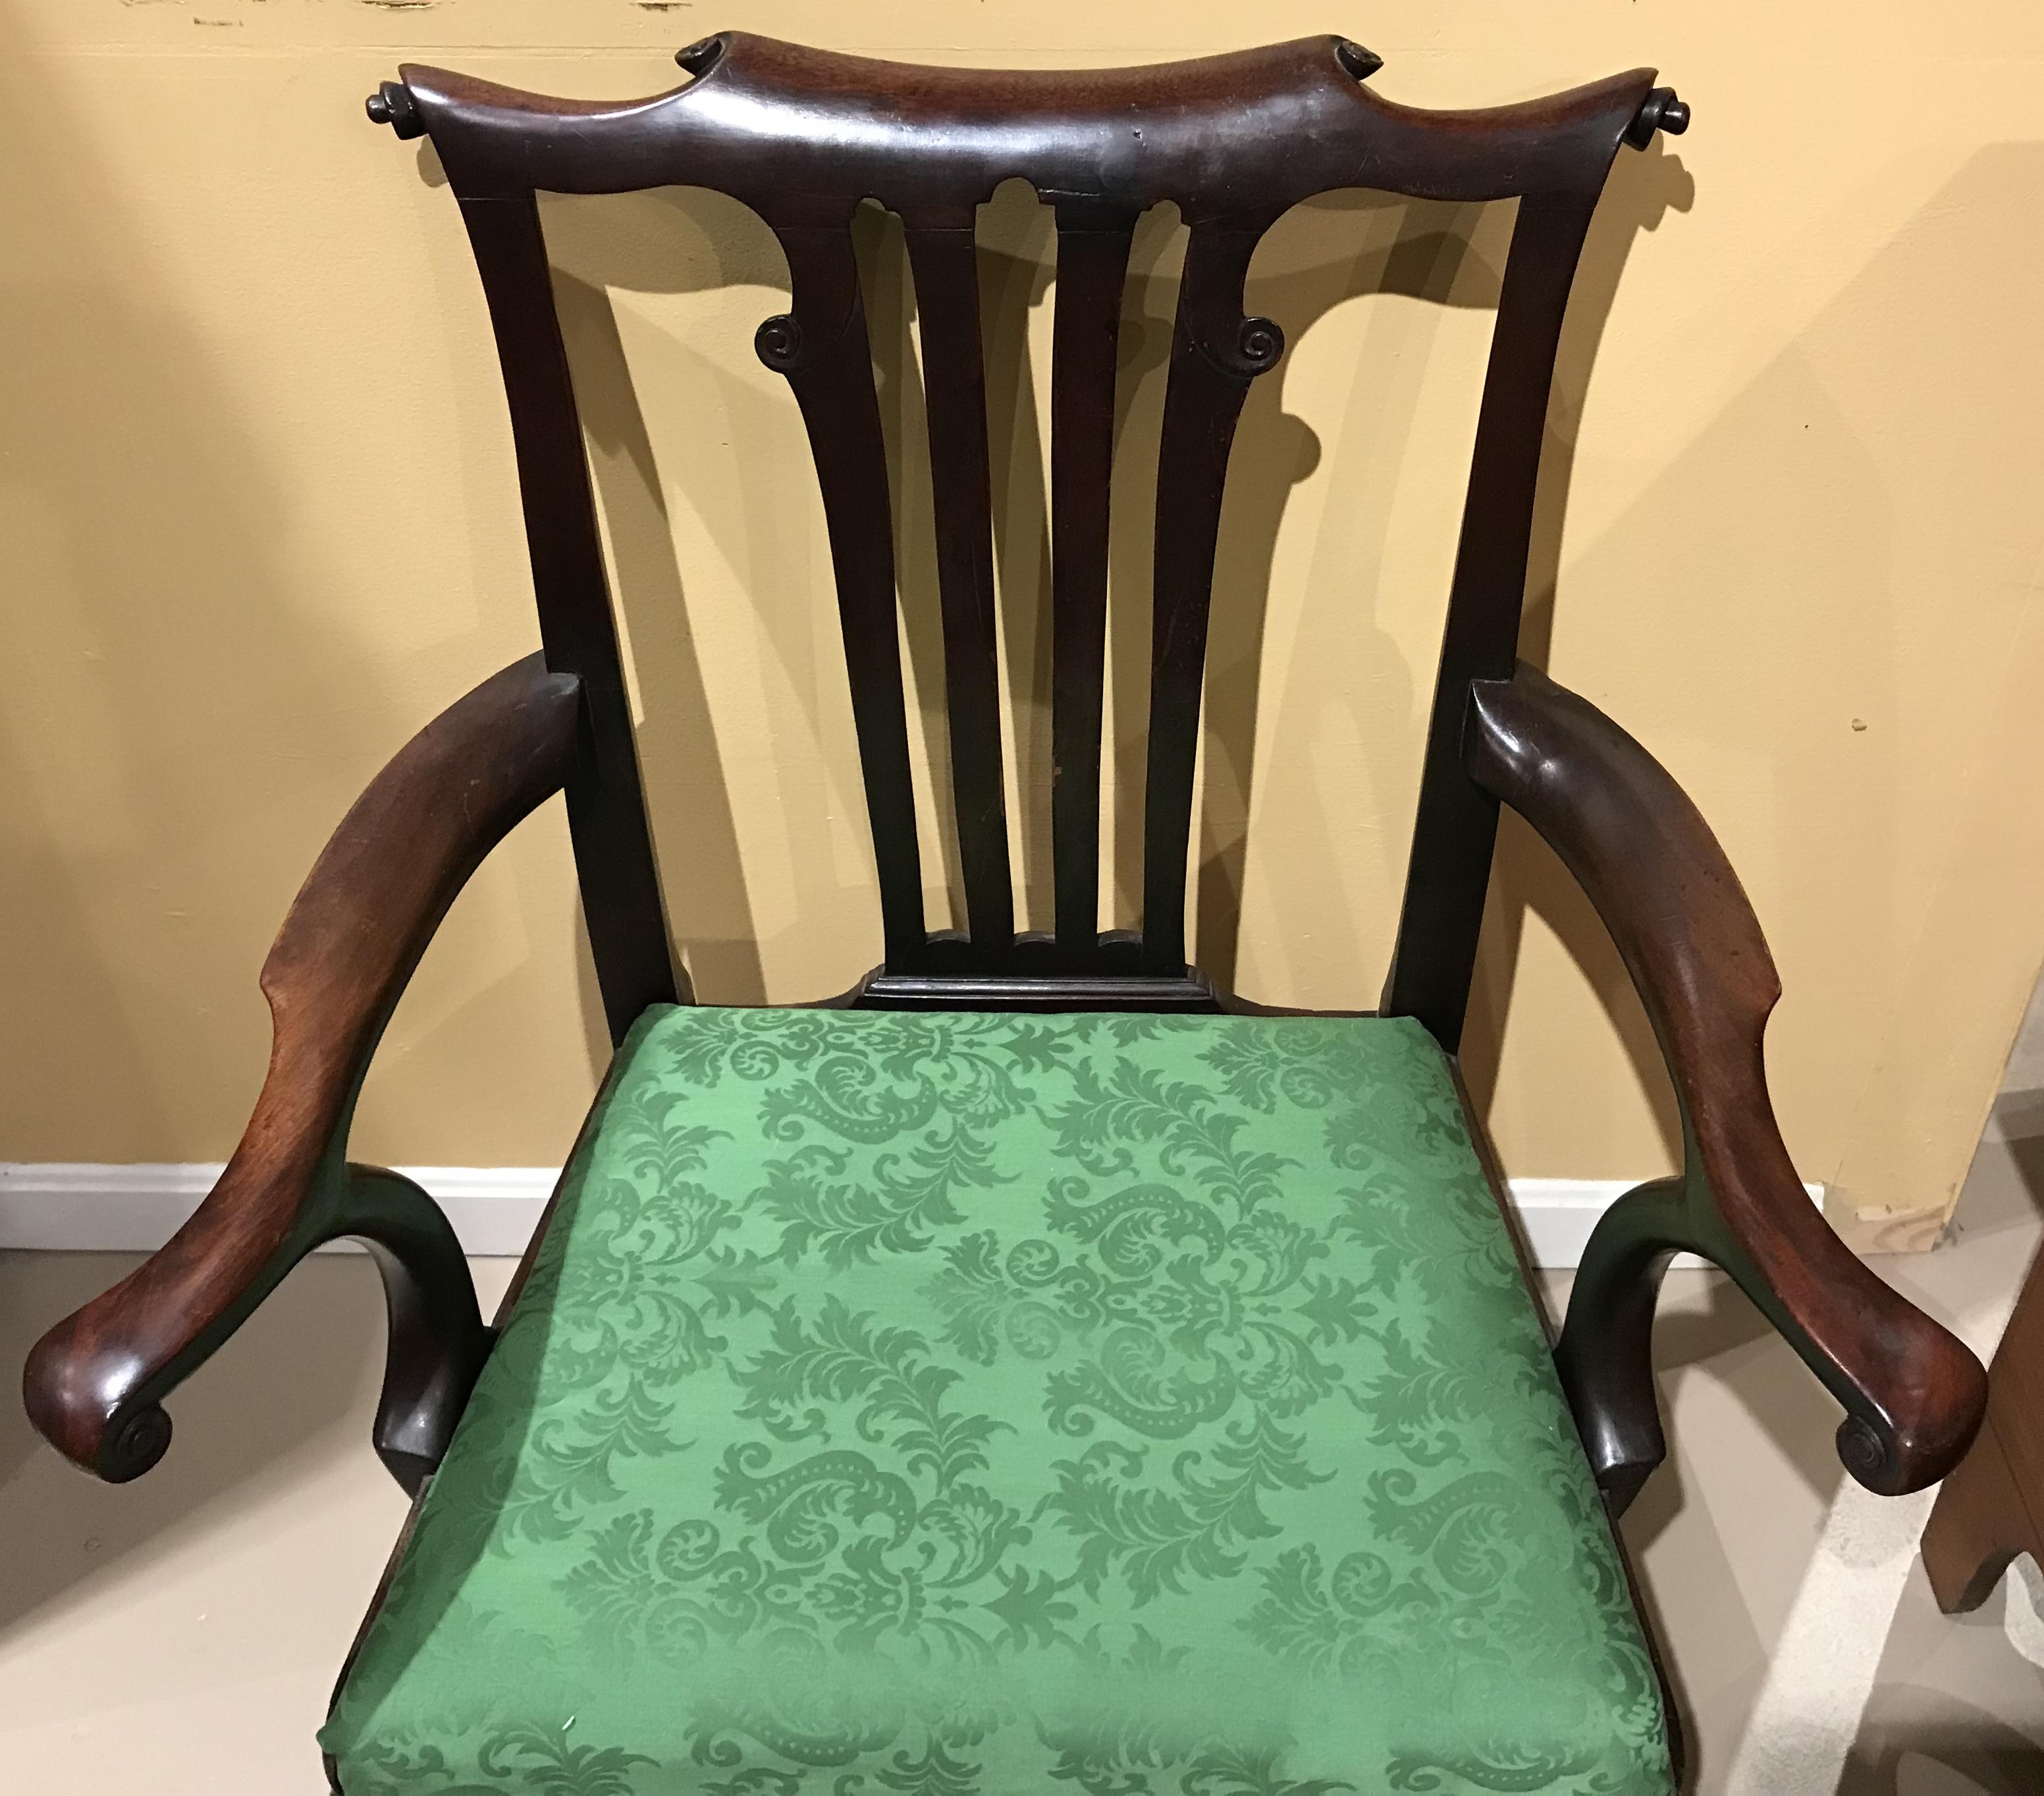 A fine example of an English Georgian mahogany side chair with scroll carved crest, arms, and splat, supported with front cabriole legs with turned stretchers. Roman numeral VII carved in the base of the back splat. In very good condition, with